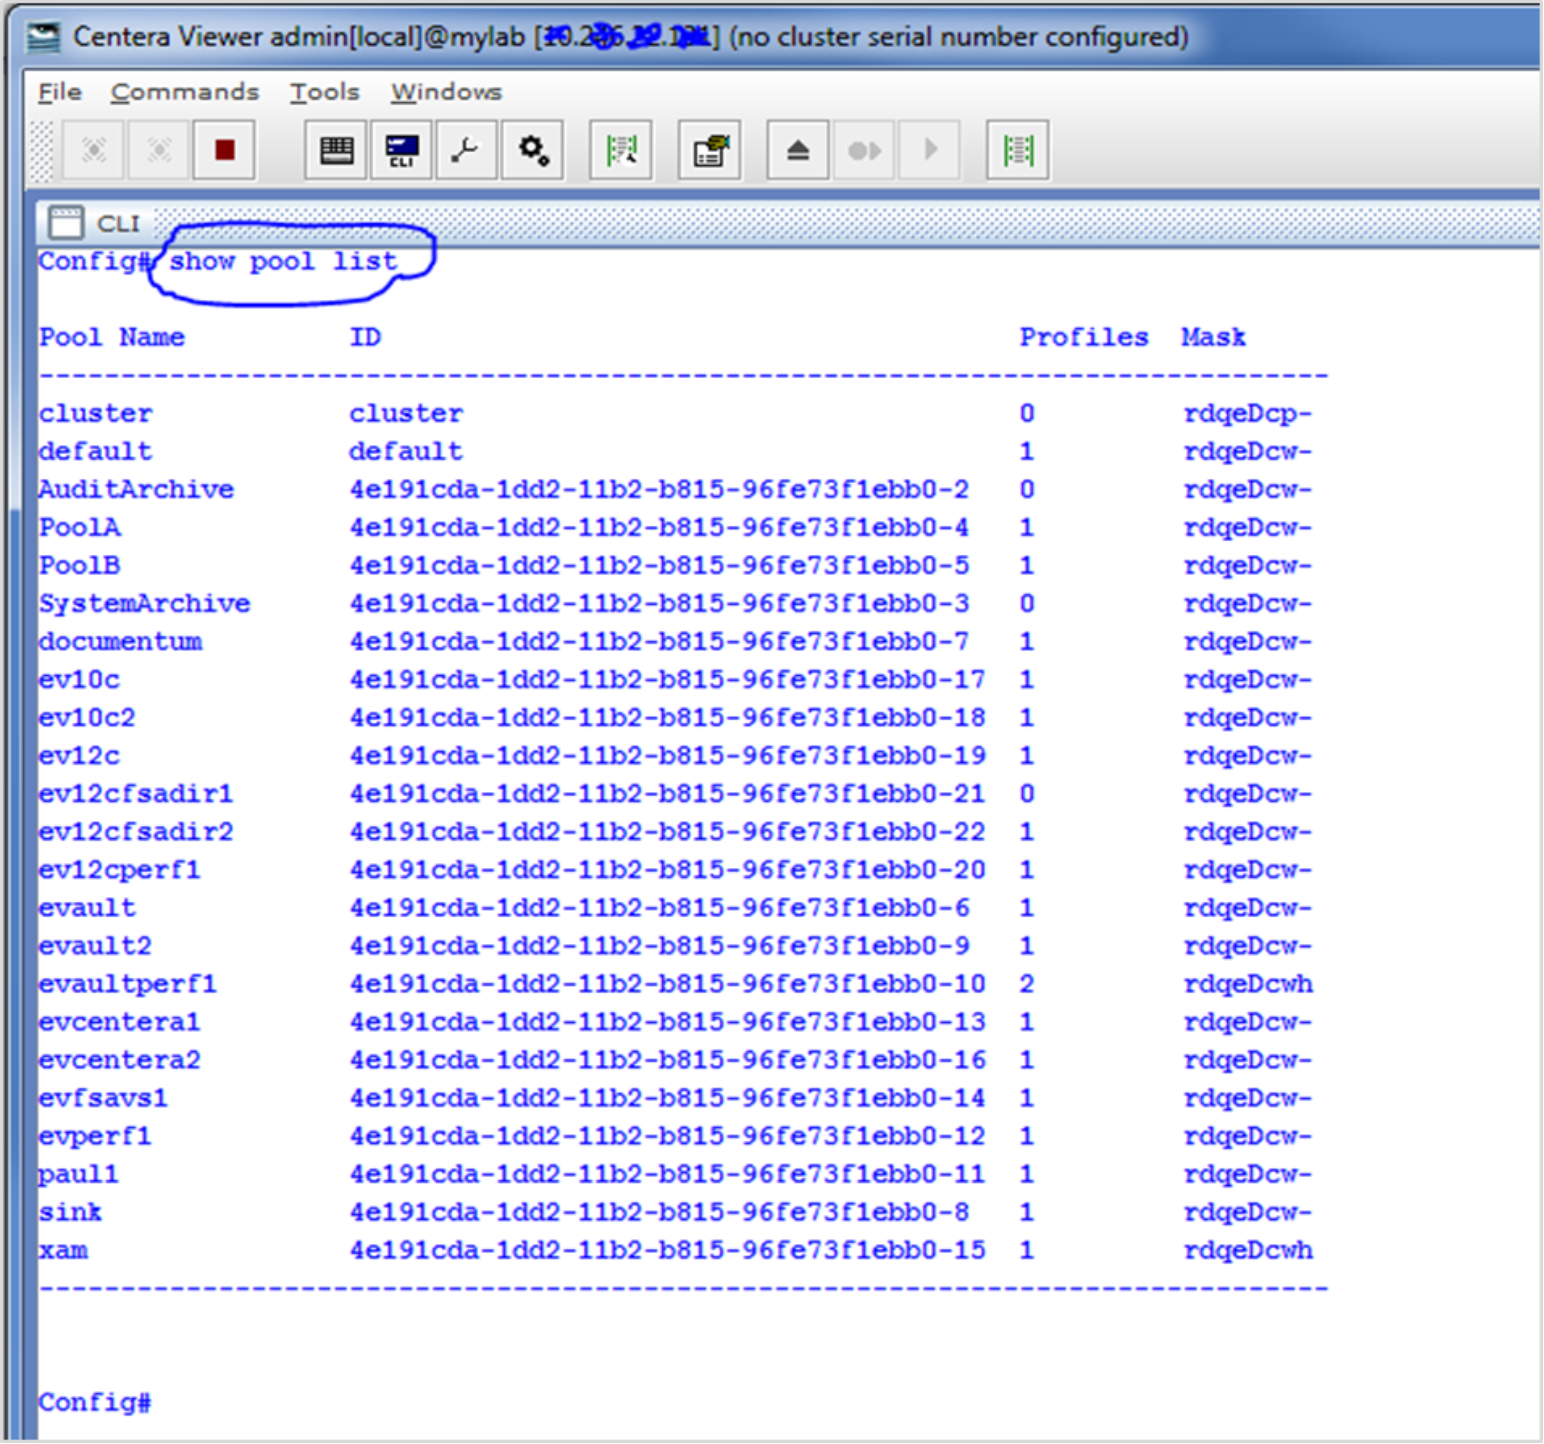 This figure shows example output when using the Centera viewer tool to show the list of pools on the Centera